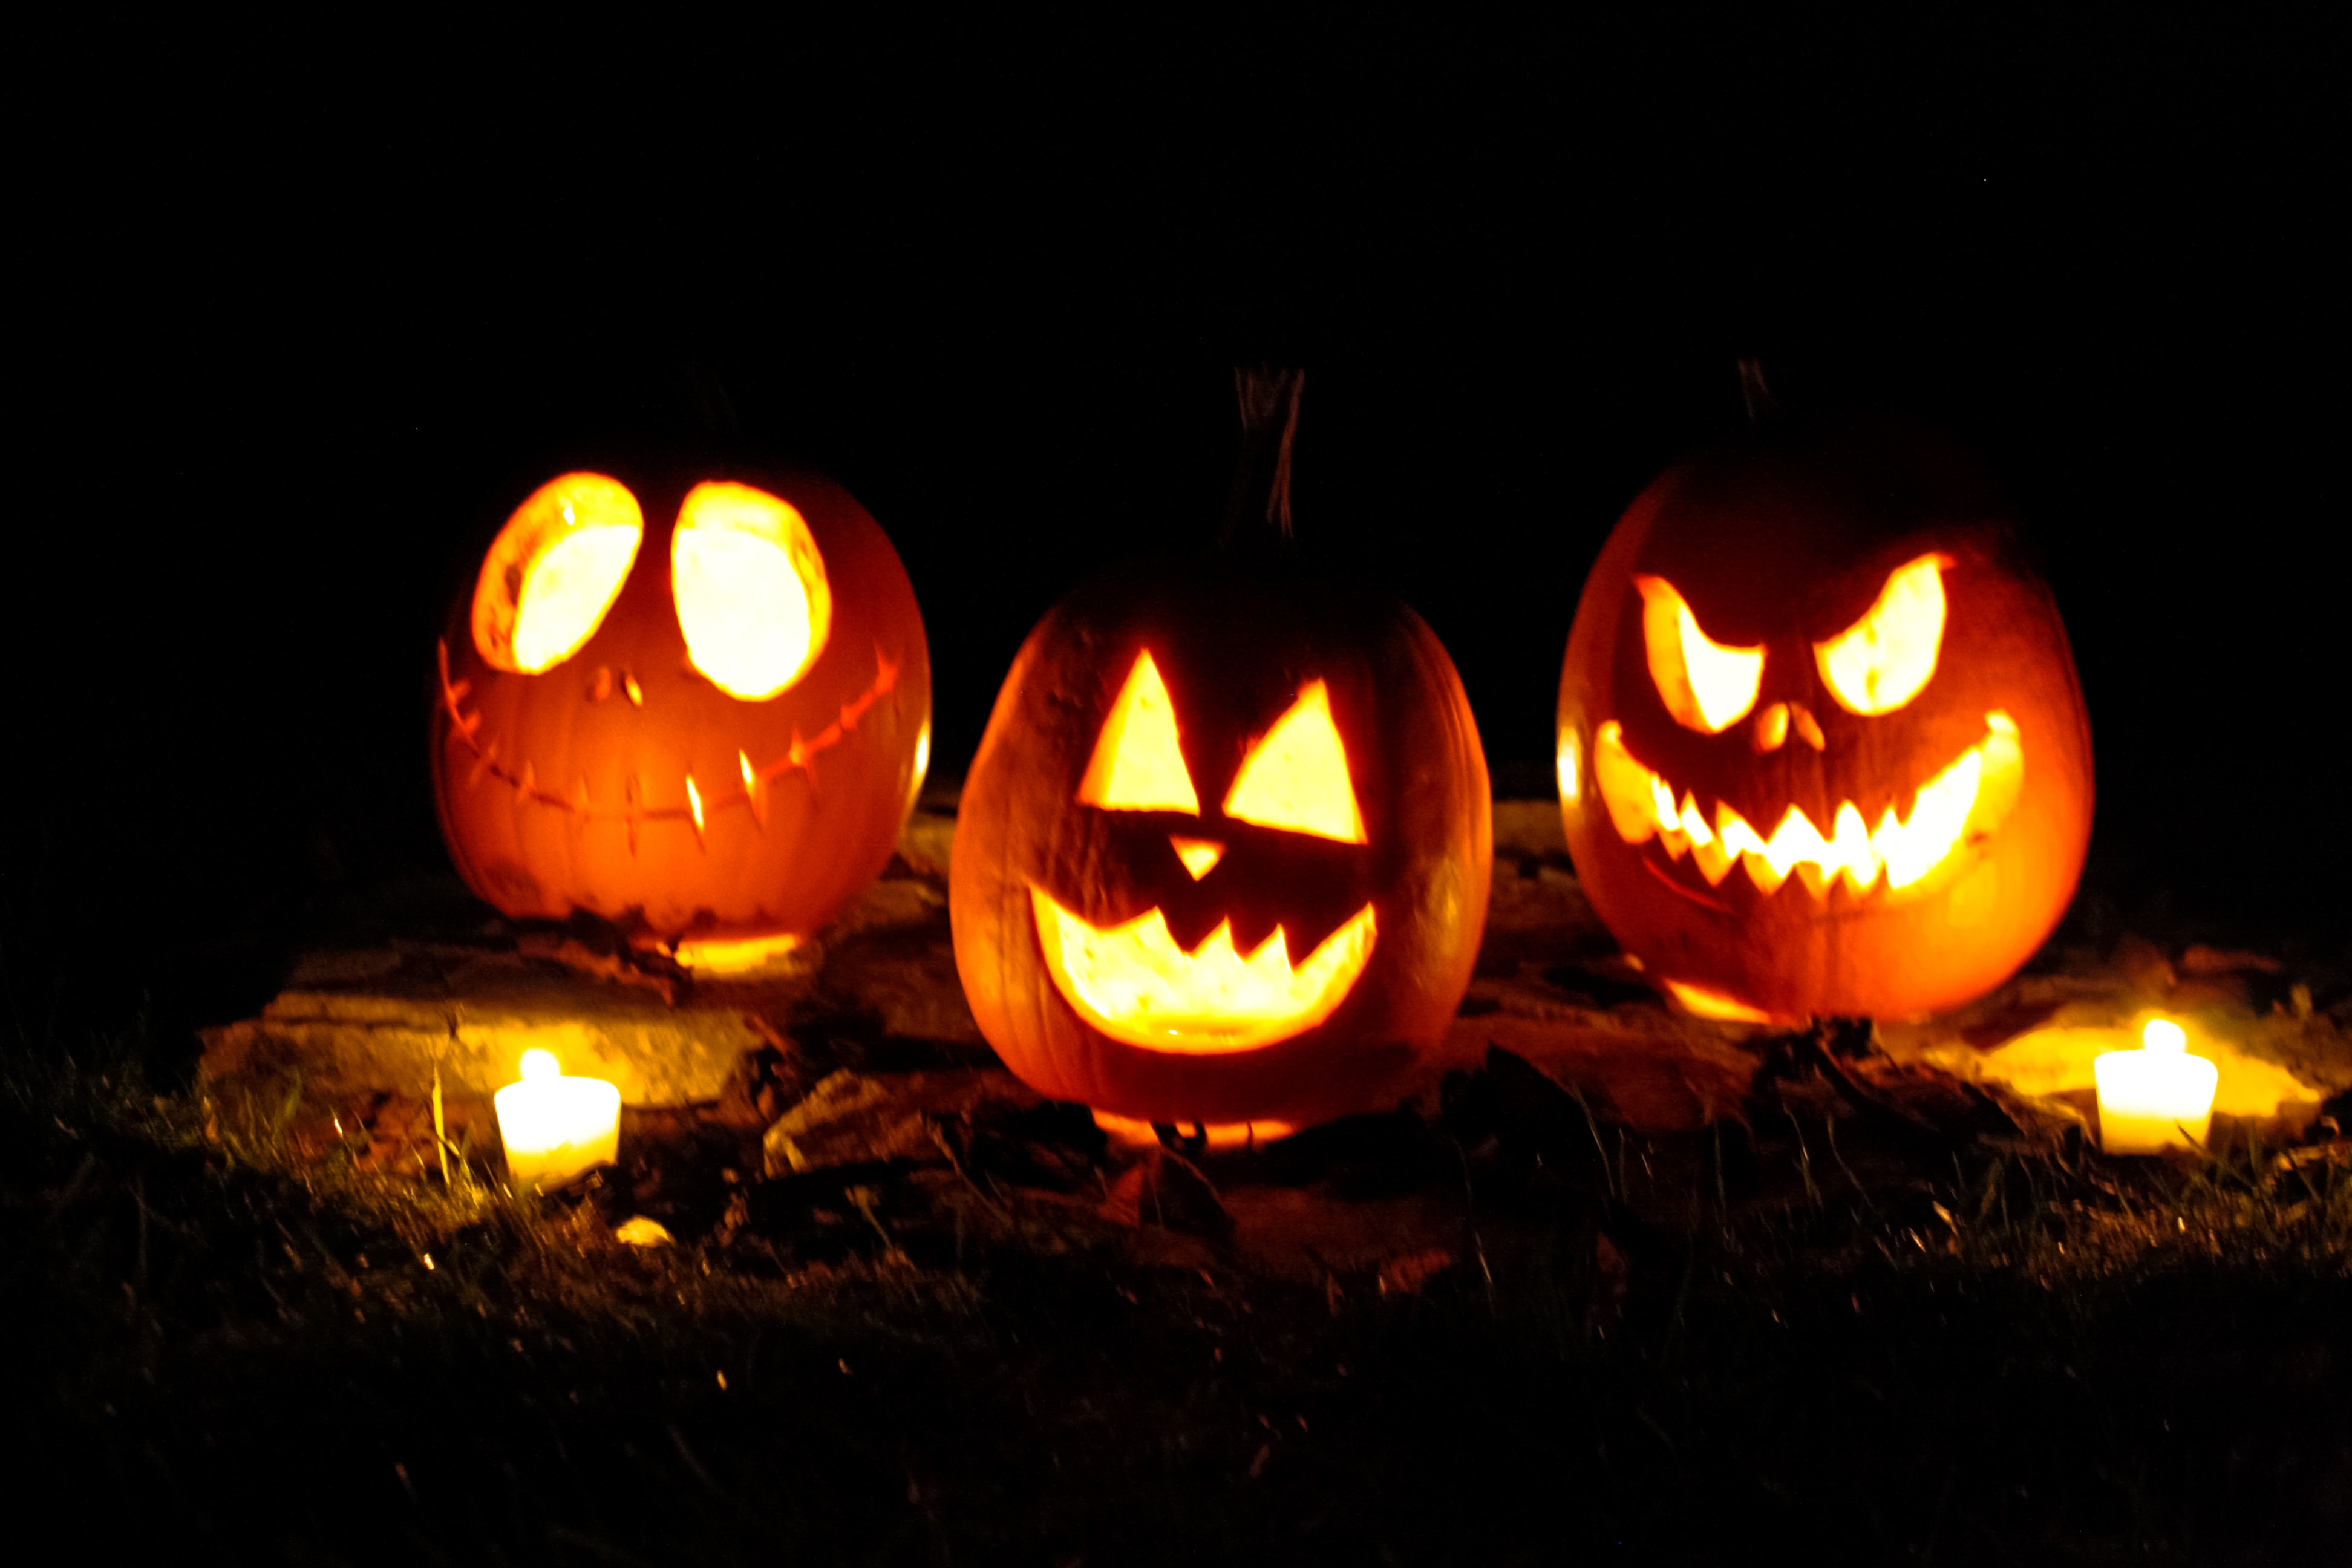 Trick or treat with a Kubernetes cloud stack